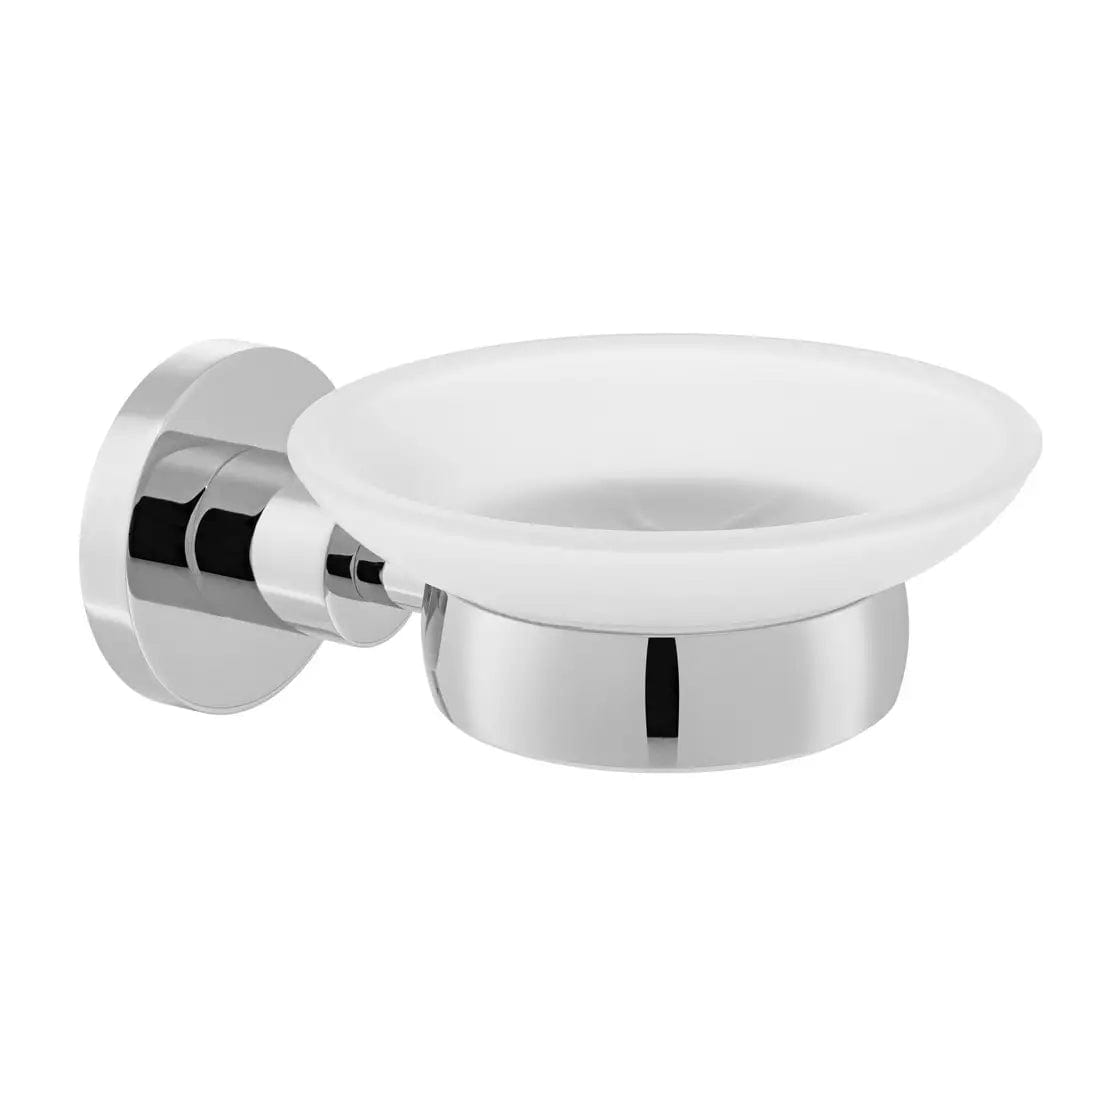 Vado Elements Frosted Glass Soap Dish & Holder - ELE-182-C/P | Supply Master | Accra, Ghana Bathroom Accessories Buy Tools hardware Building materials